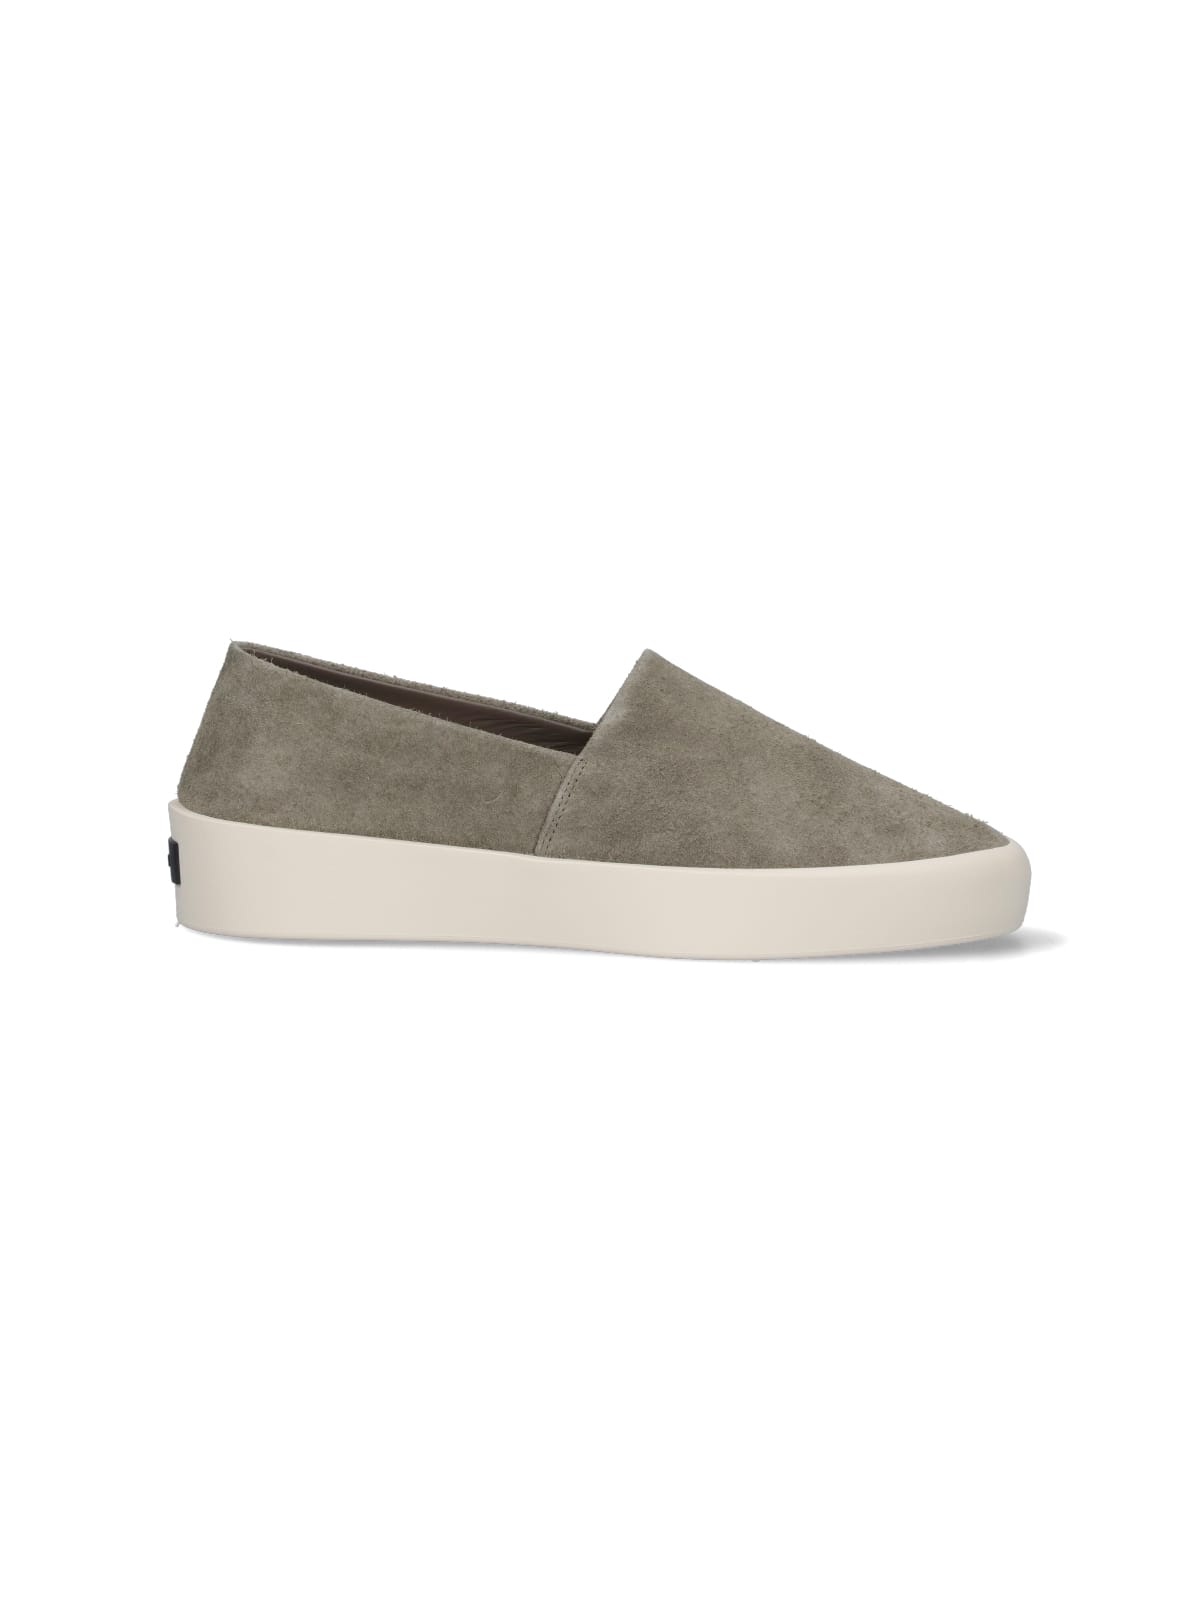 Shop Fear Of God Espadrilles Sneakers In Taupe